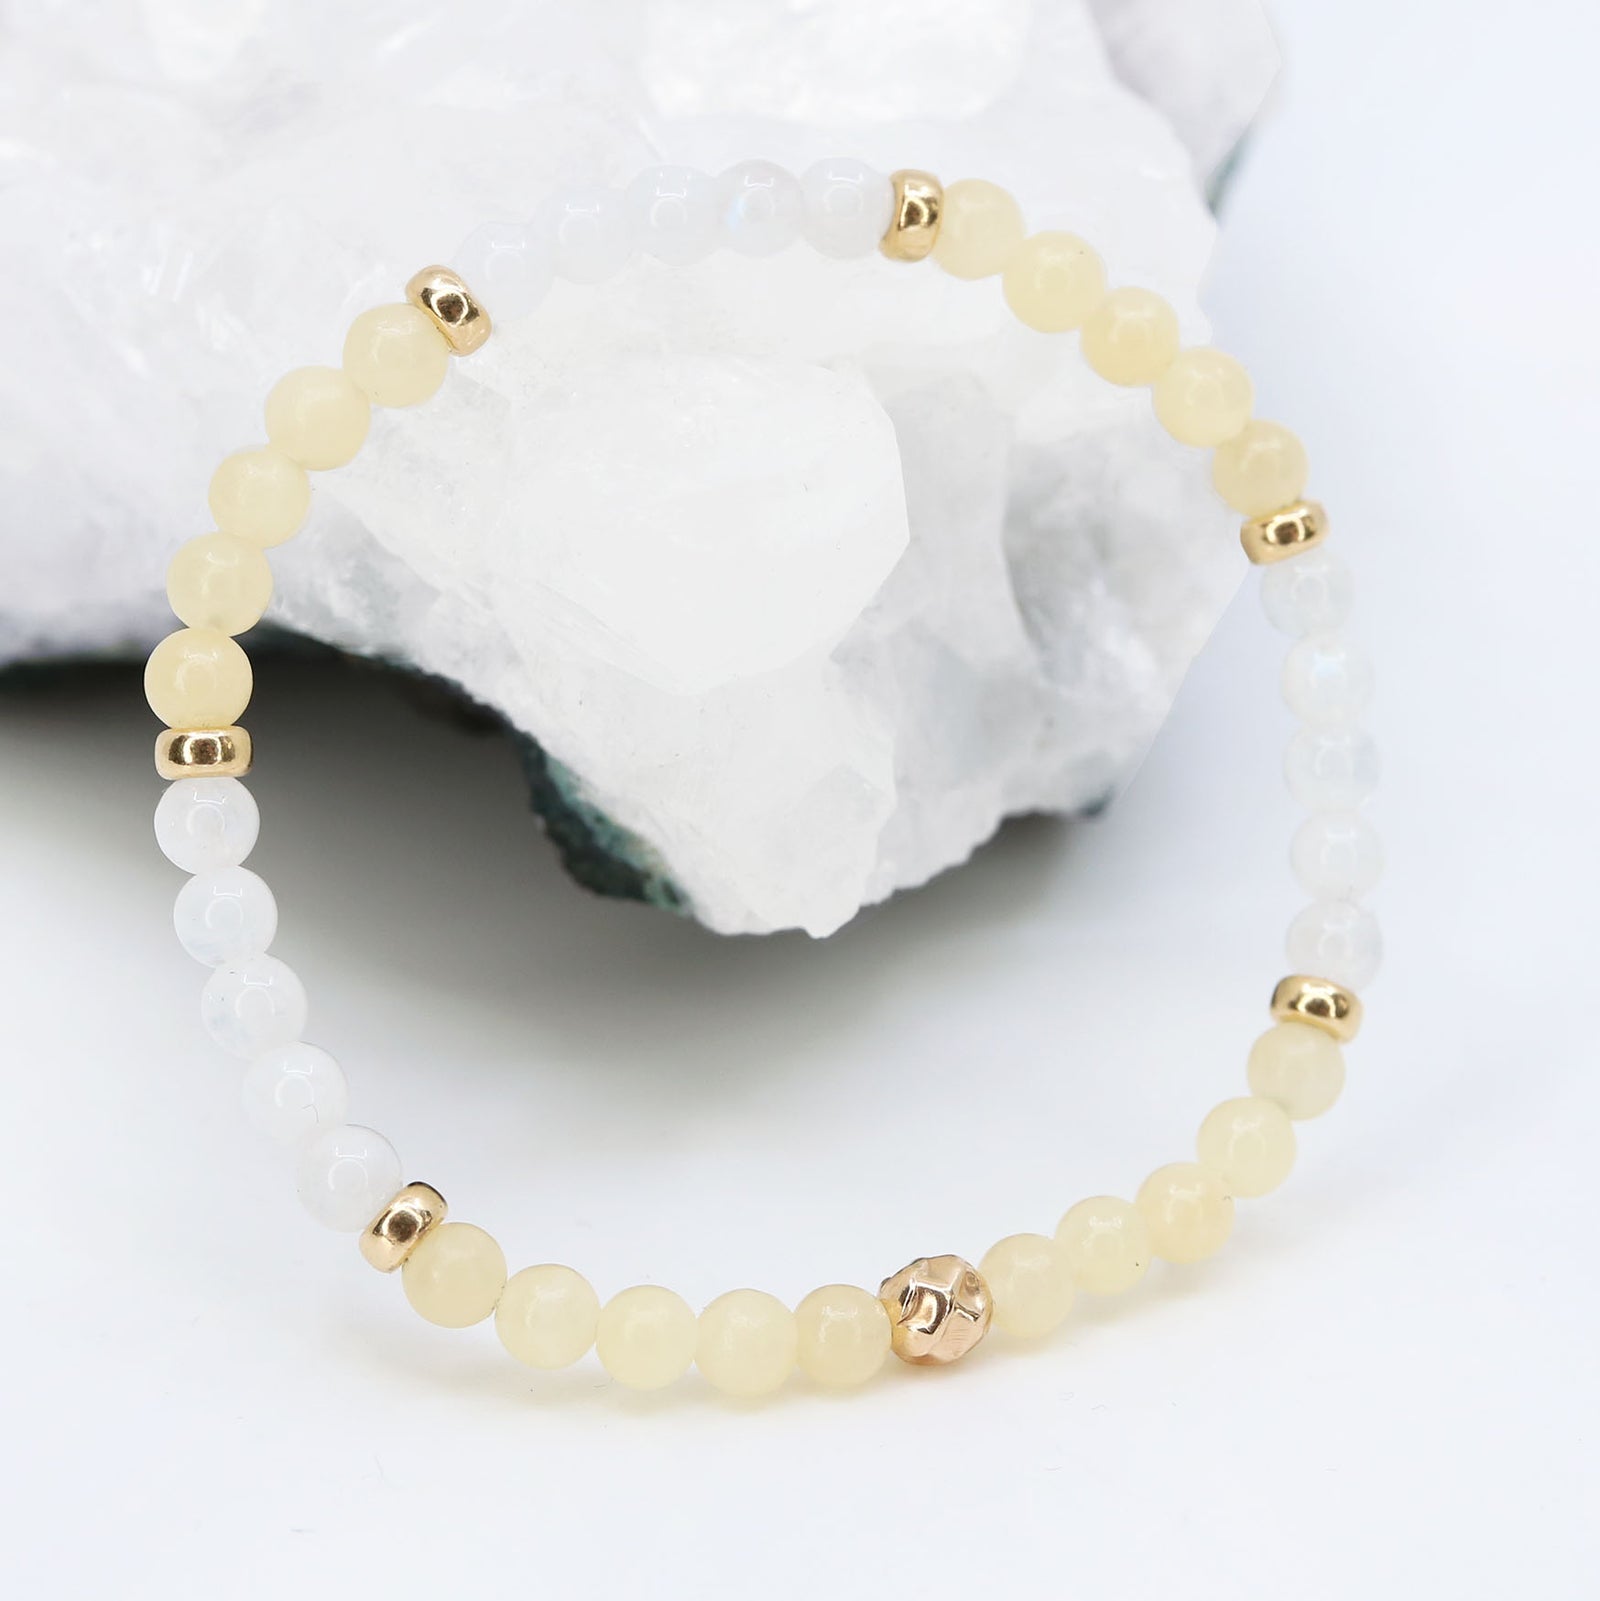 Aura Beaded Necklace in Yellow, Rose and White Gold